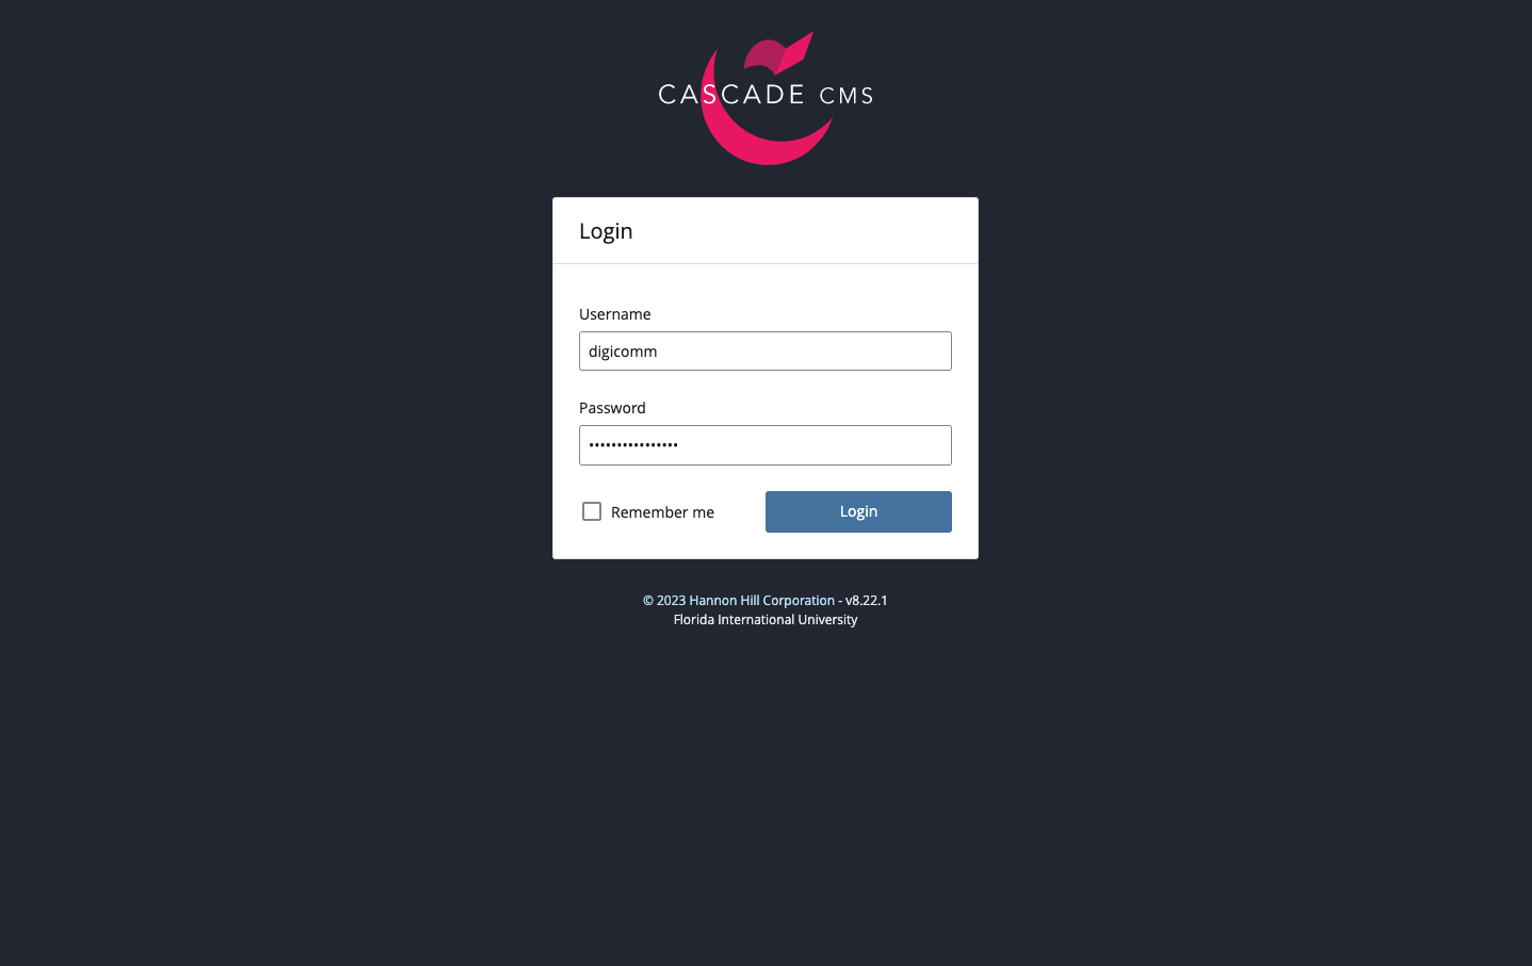 Log in to Cascade